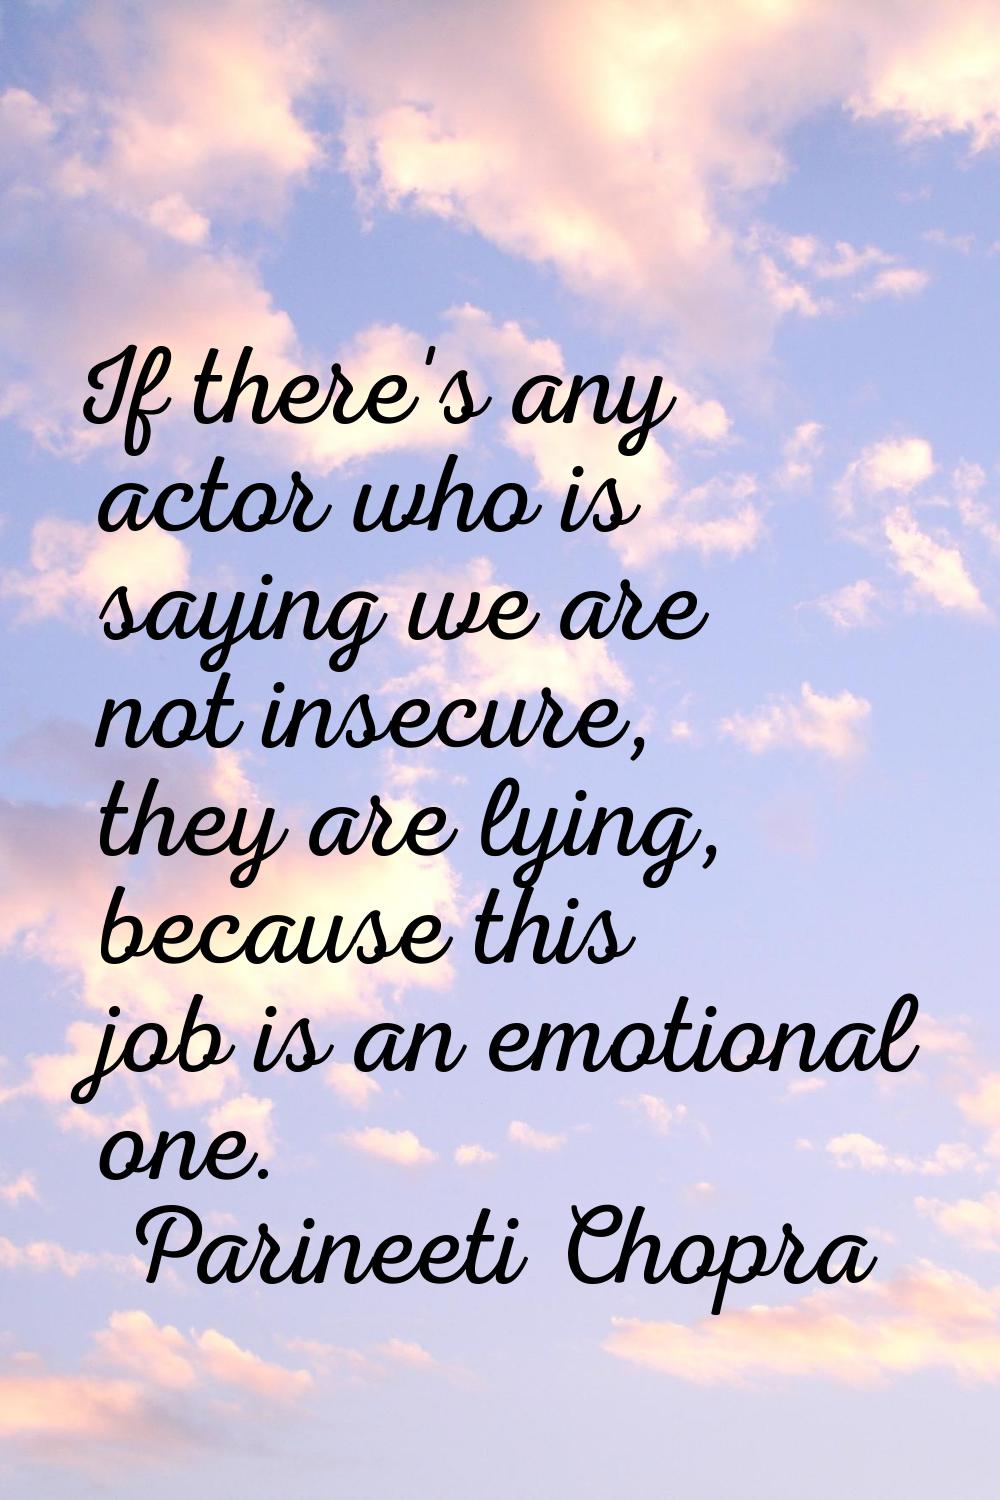 If there's any actor who is saying we are not insecure, they are lying, because this job is an emot